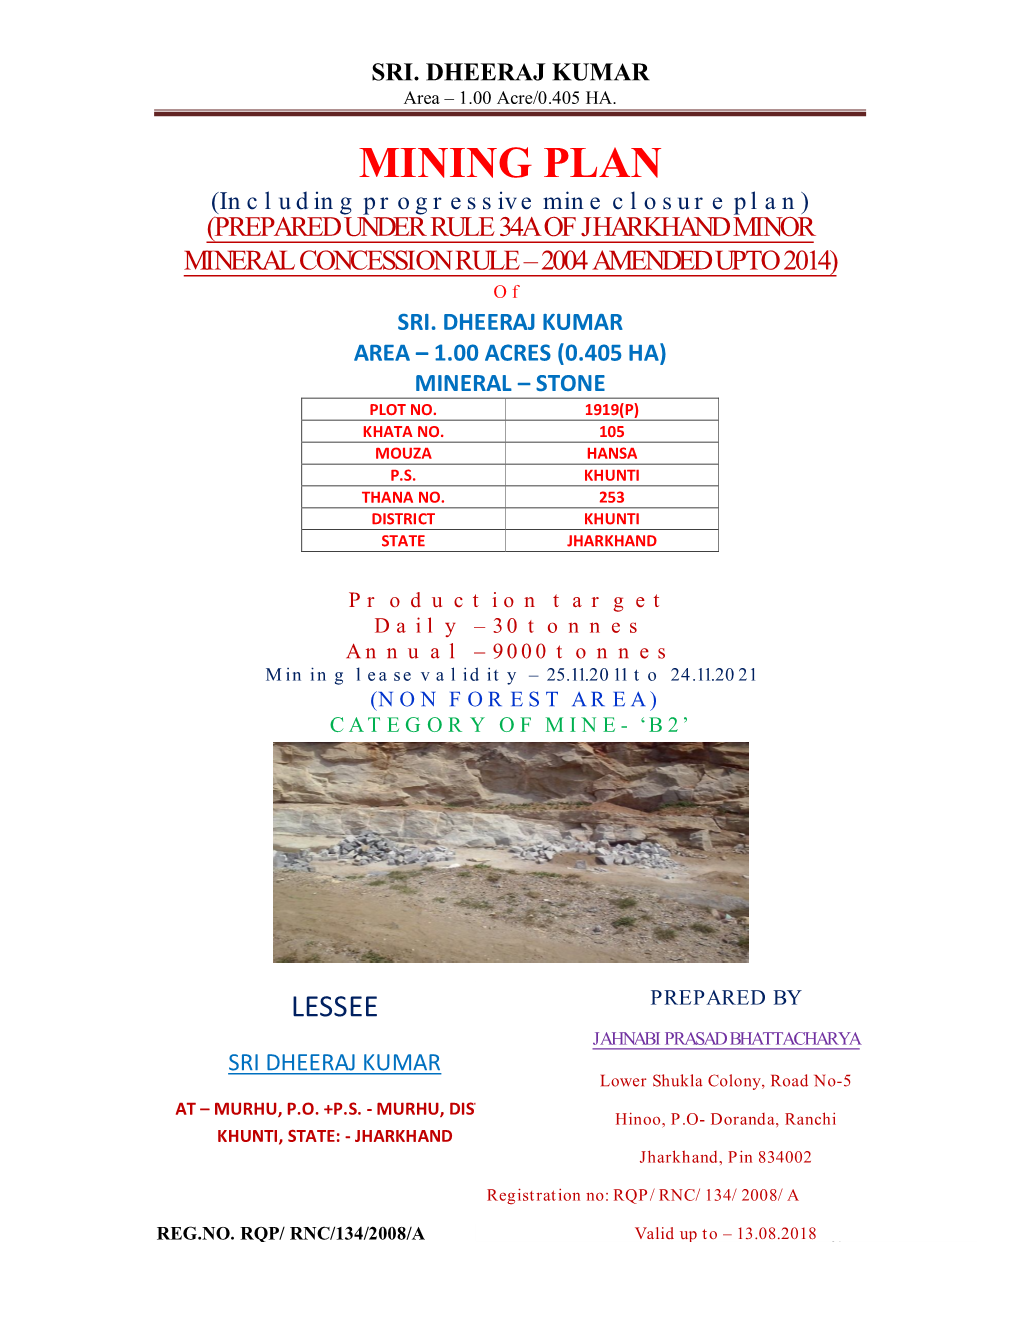 MINING PLAN (Including Progressive Mine Closure Plan) (PREPARED UNDER RULE 34A of JHARKHAND MINOR MINERAL CONCESSION RULE – 2004 AMENDED UPTO 2014) of SRI